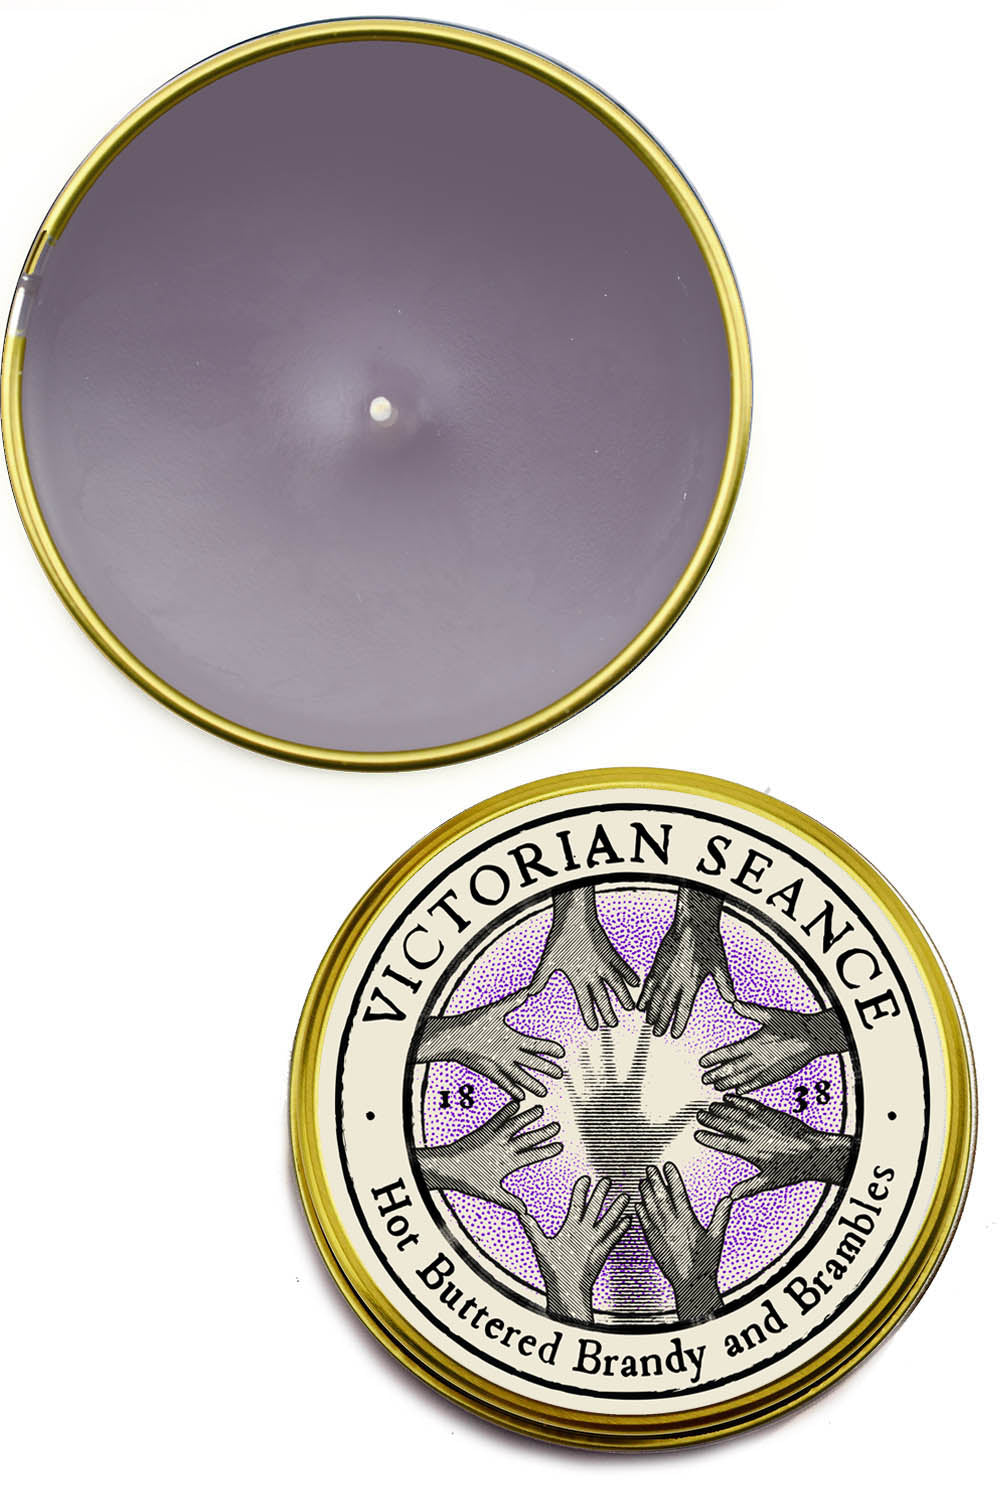 Victorian Seance - Double Size Limited Edition Candle